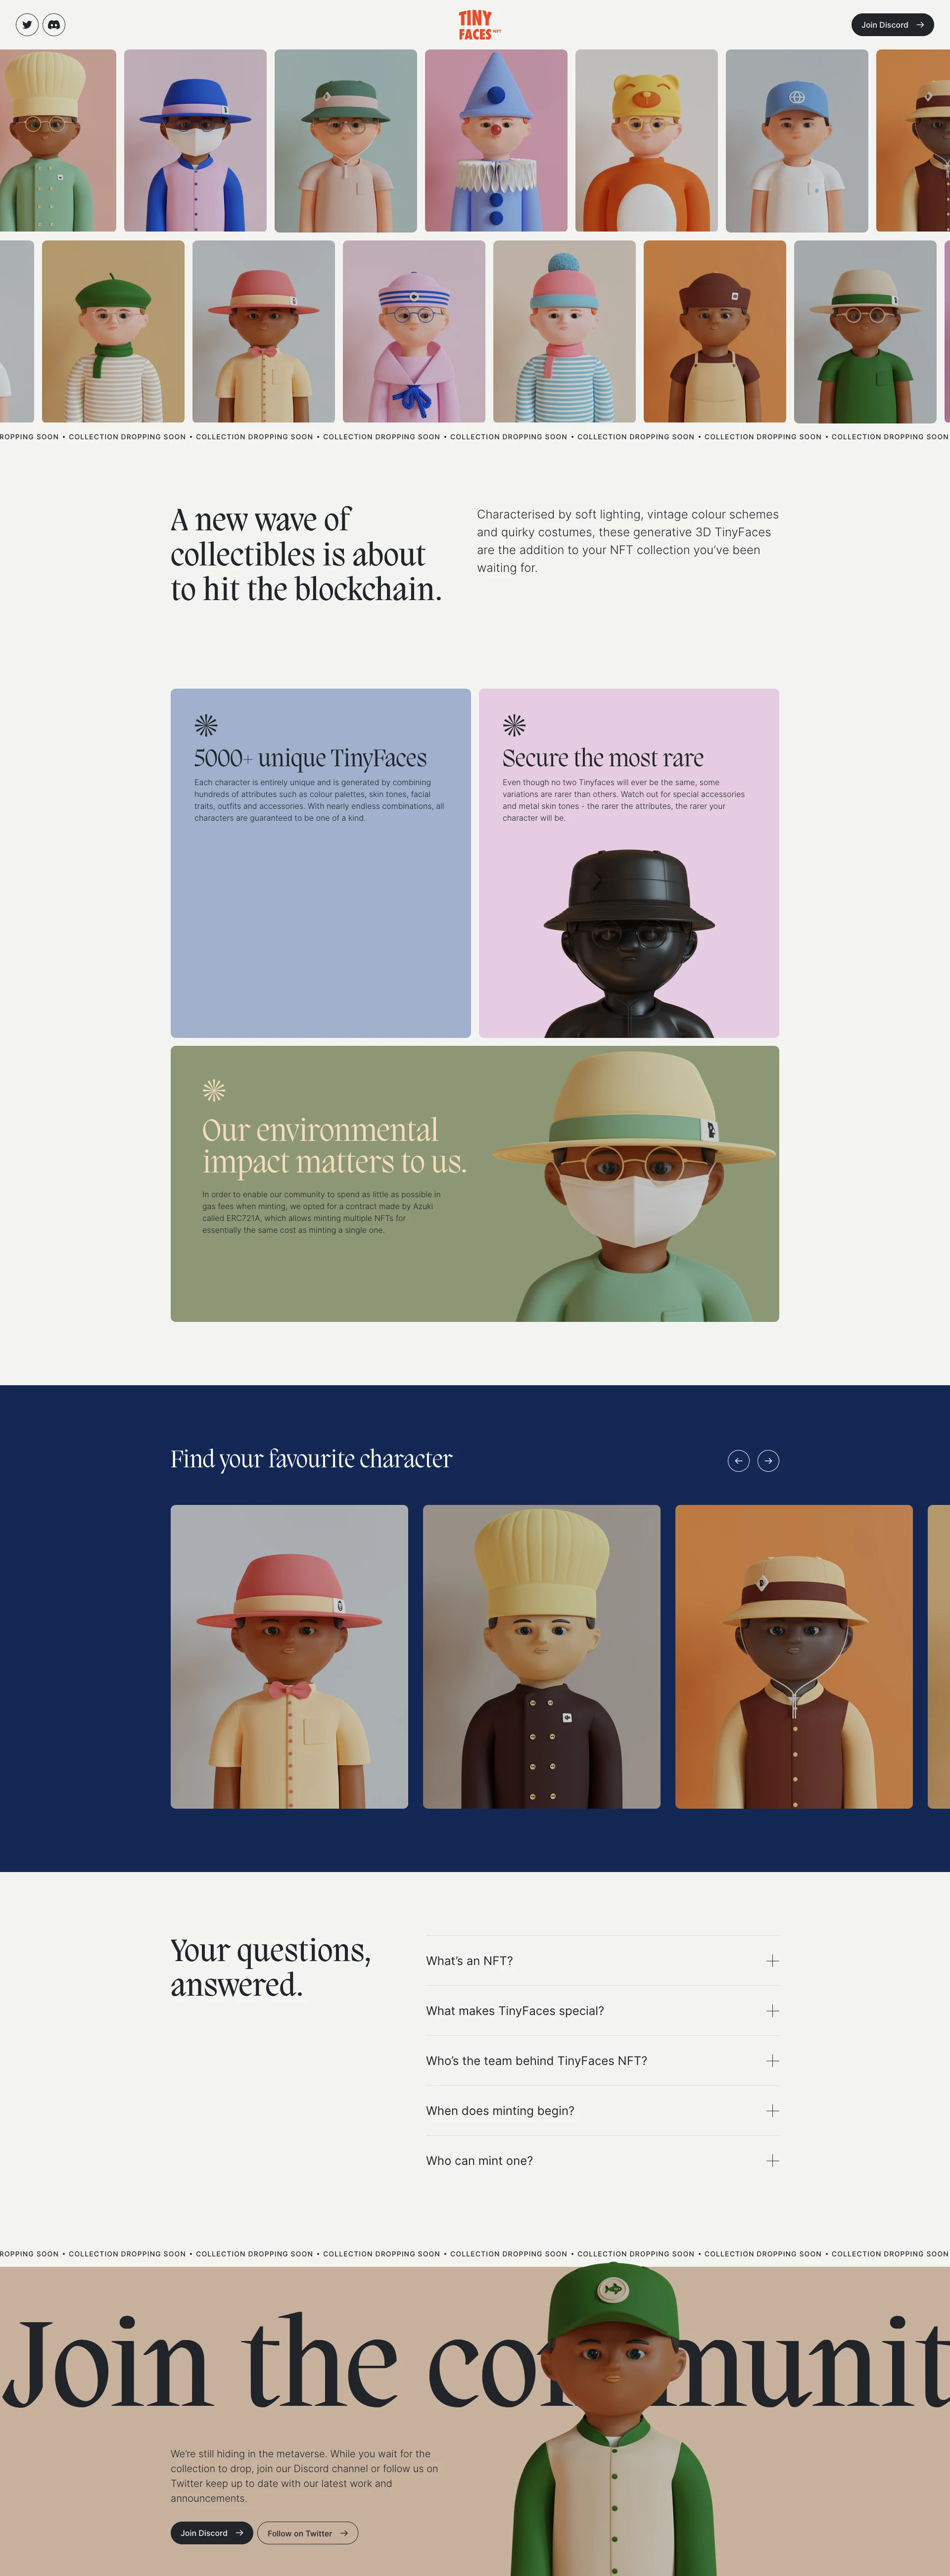 TinyFaces NFT Landing Page Example: Tinyfaces is a collection of generative whimsical 3D characters living as NFTs on the blockchain. Each character is entirely unique and is generated by combining hundreds of attributes such as color palettes, skin tones, facial traits, outfits and accessories.